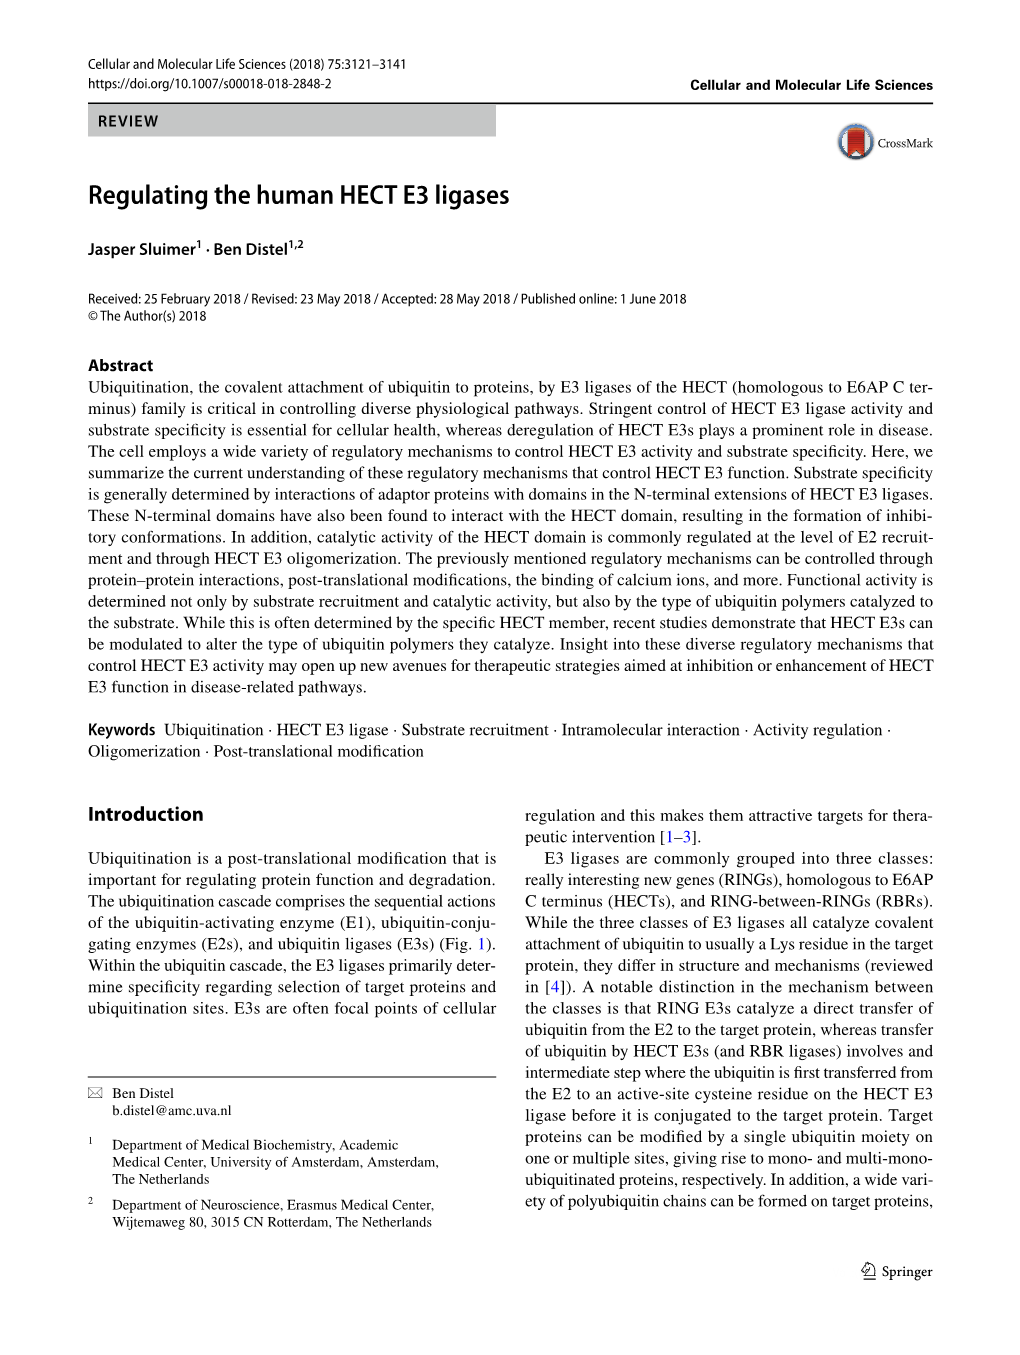 Regulating the Human HECT E3 Ligases